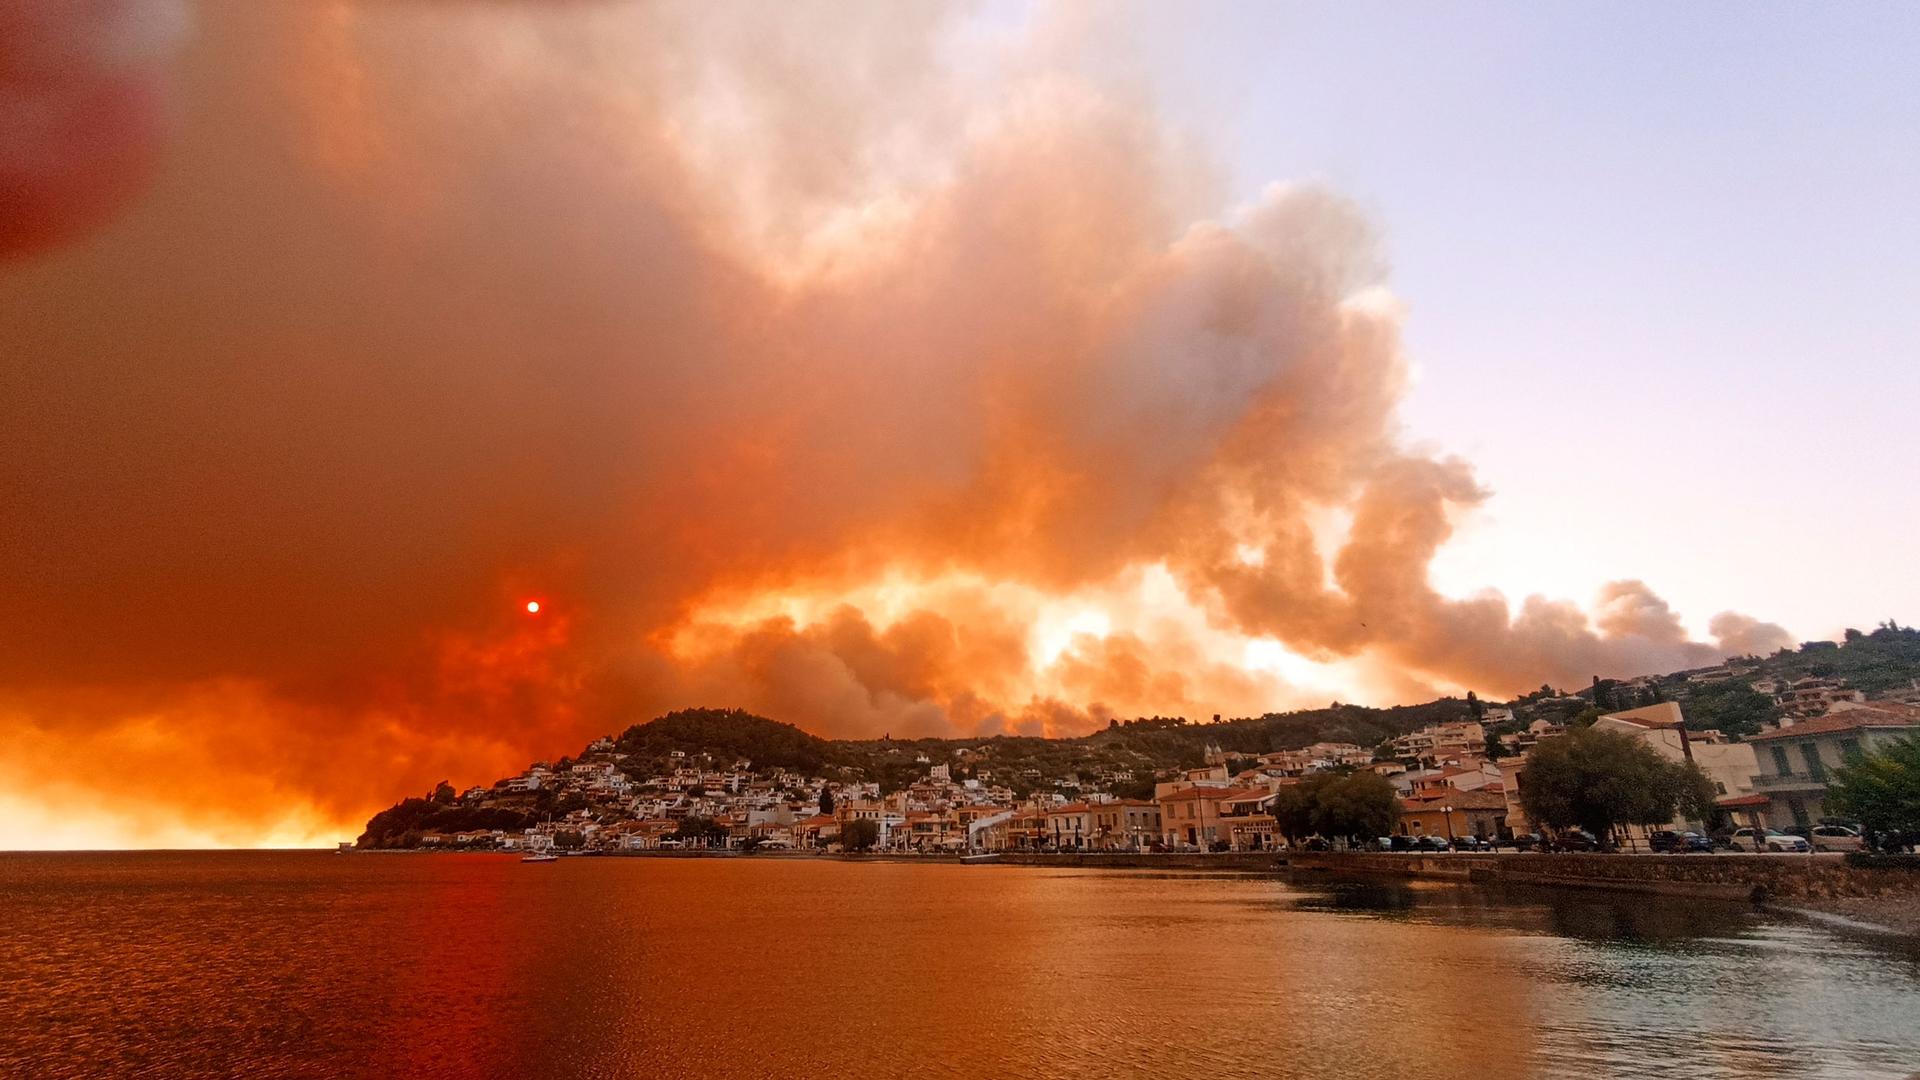 The shoreline of a village on the Greek island of Evia is shown with massive plumes of dark smoke rising in the distance.